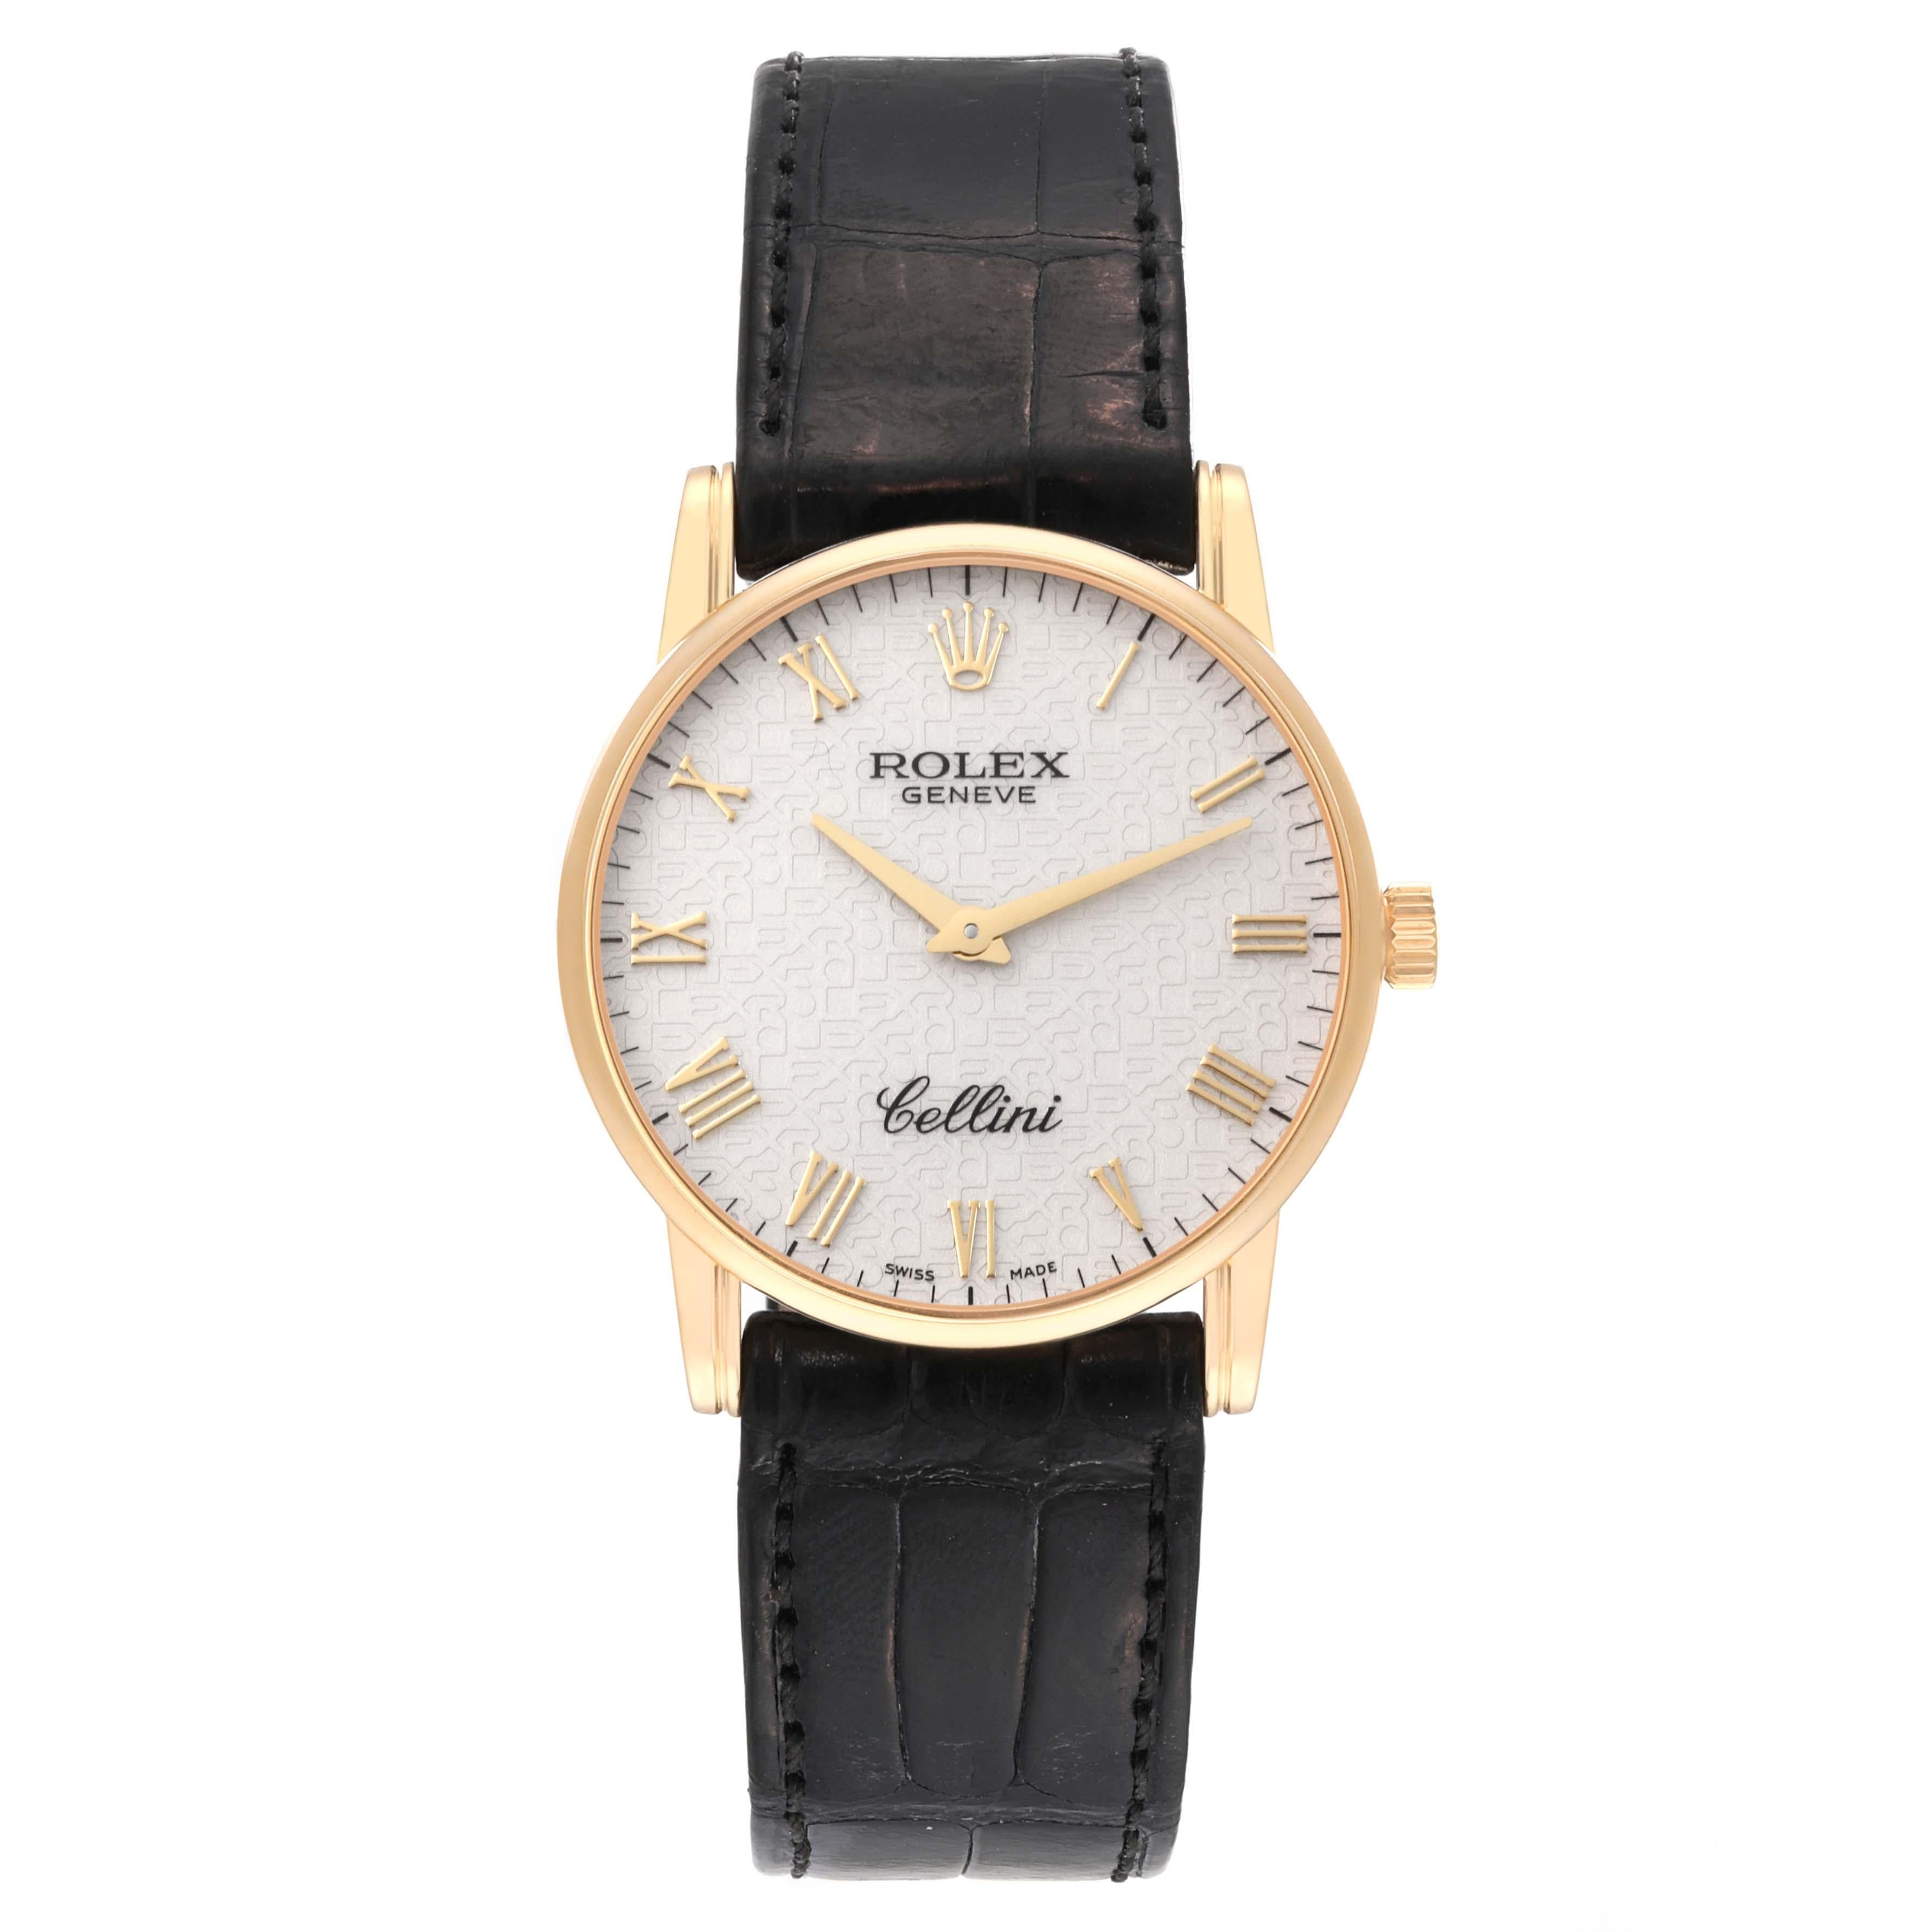 Men's Rolex Cellini Classic Yellow Gold Anniversary Dial Mens Watch 5116